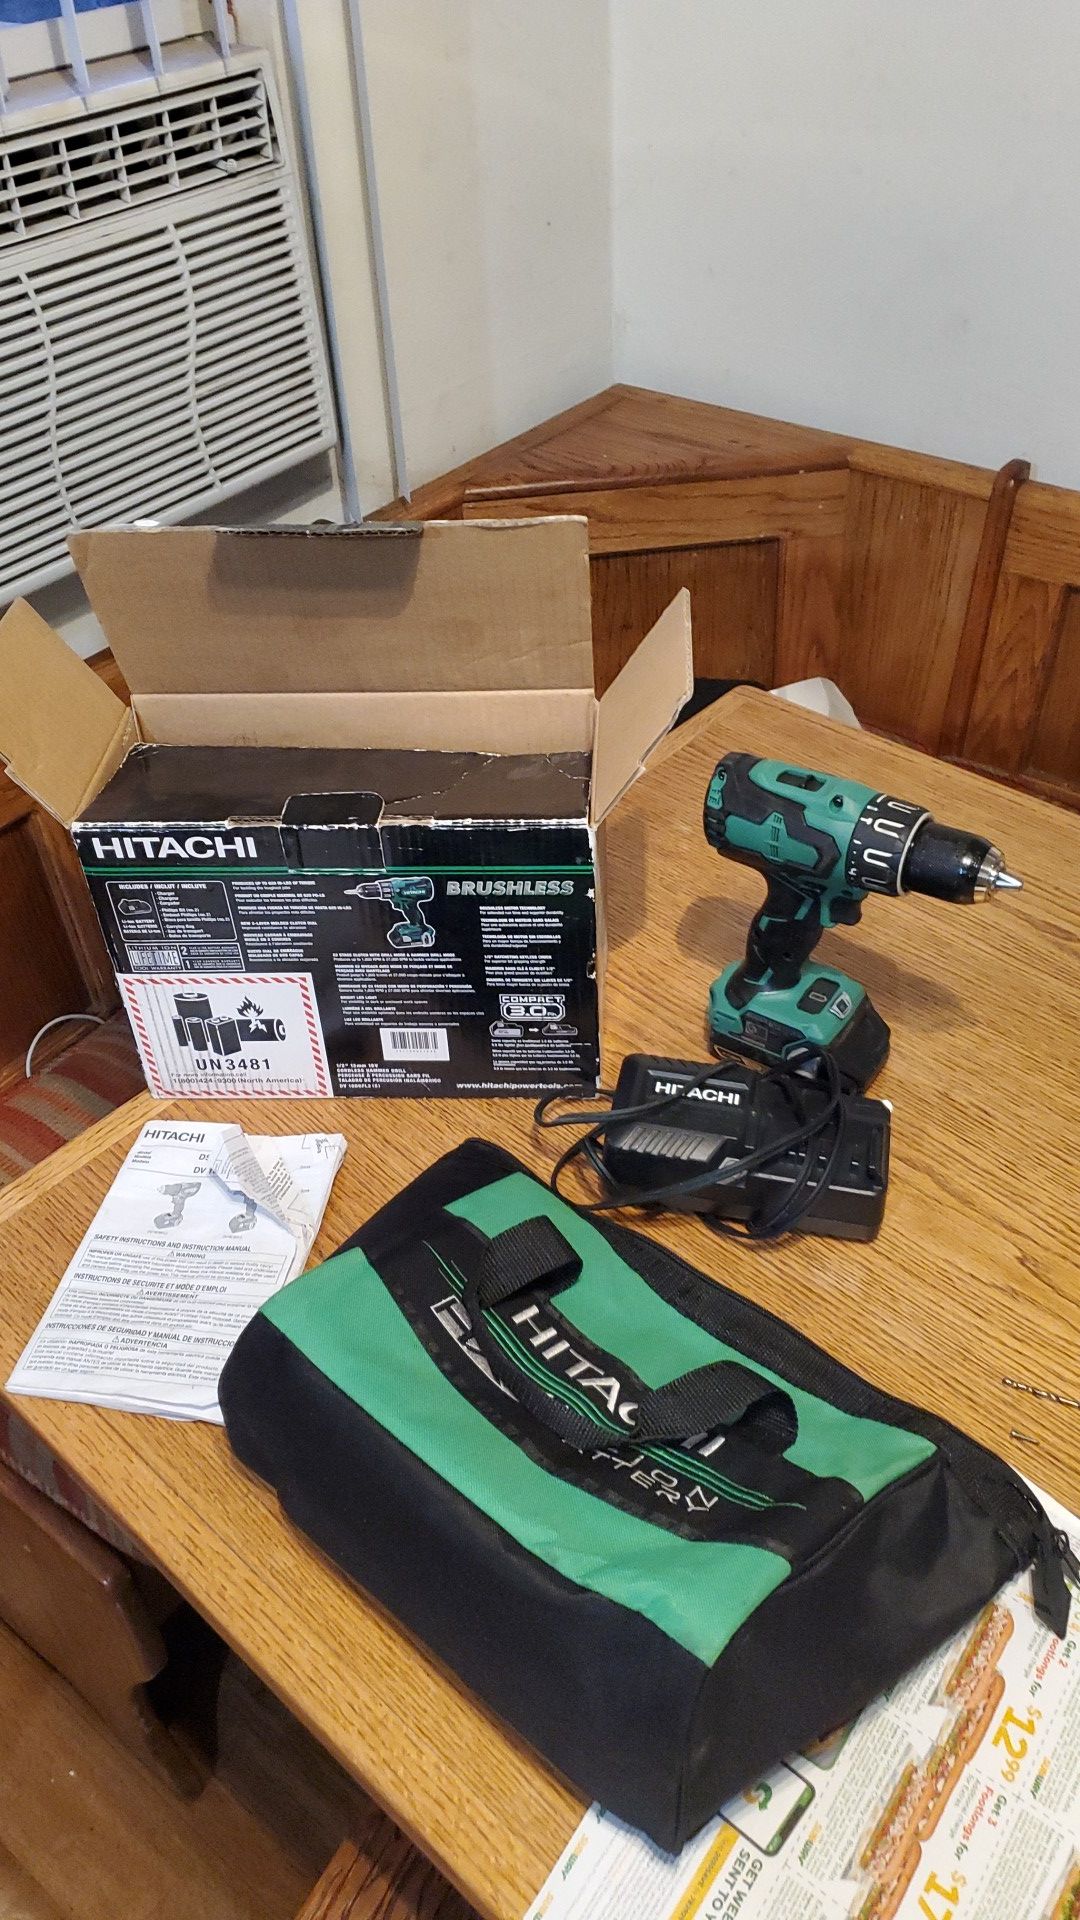 Hitachi DV18DBFL2S 18 V Brushless hammer drill is bringing power and torque to a whole new level. This tool features a Brushless motor